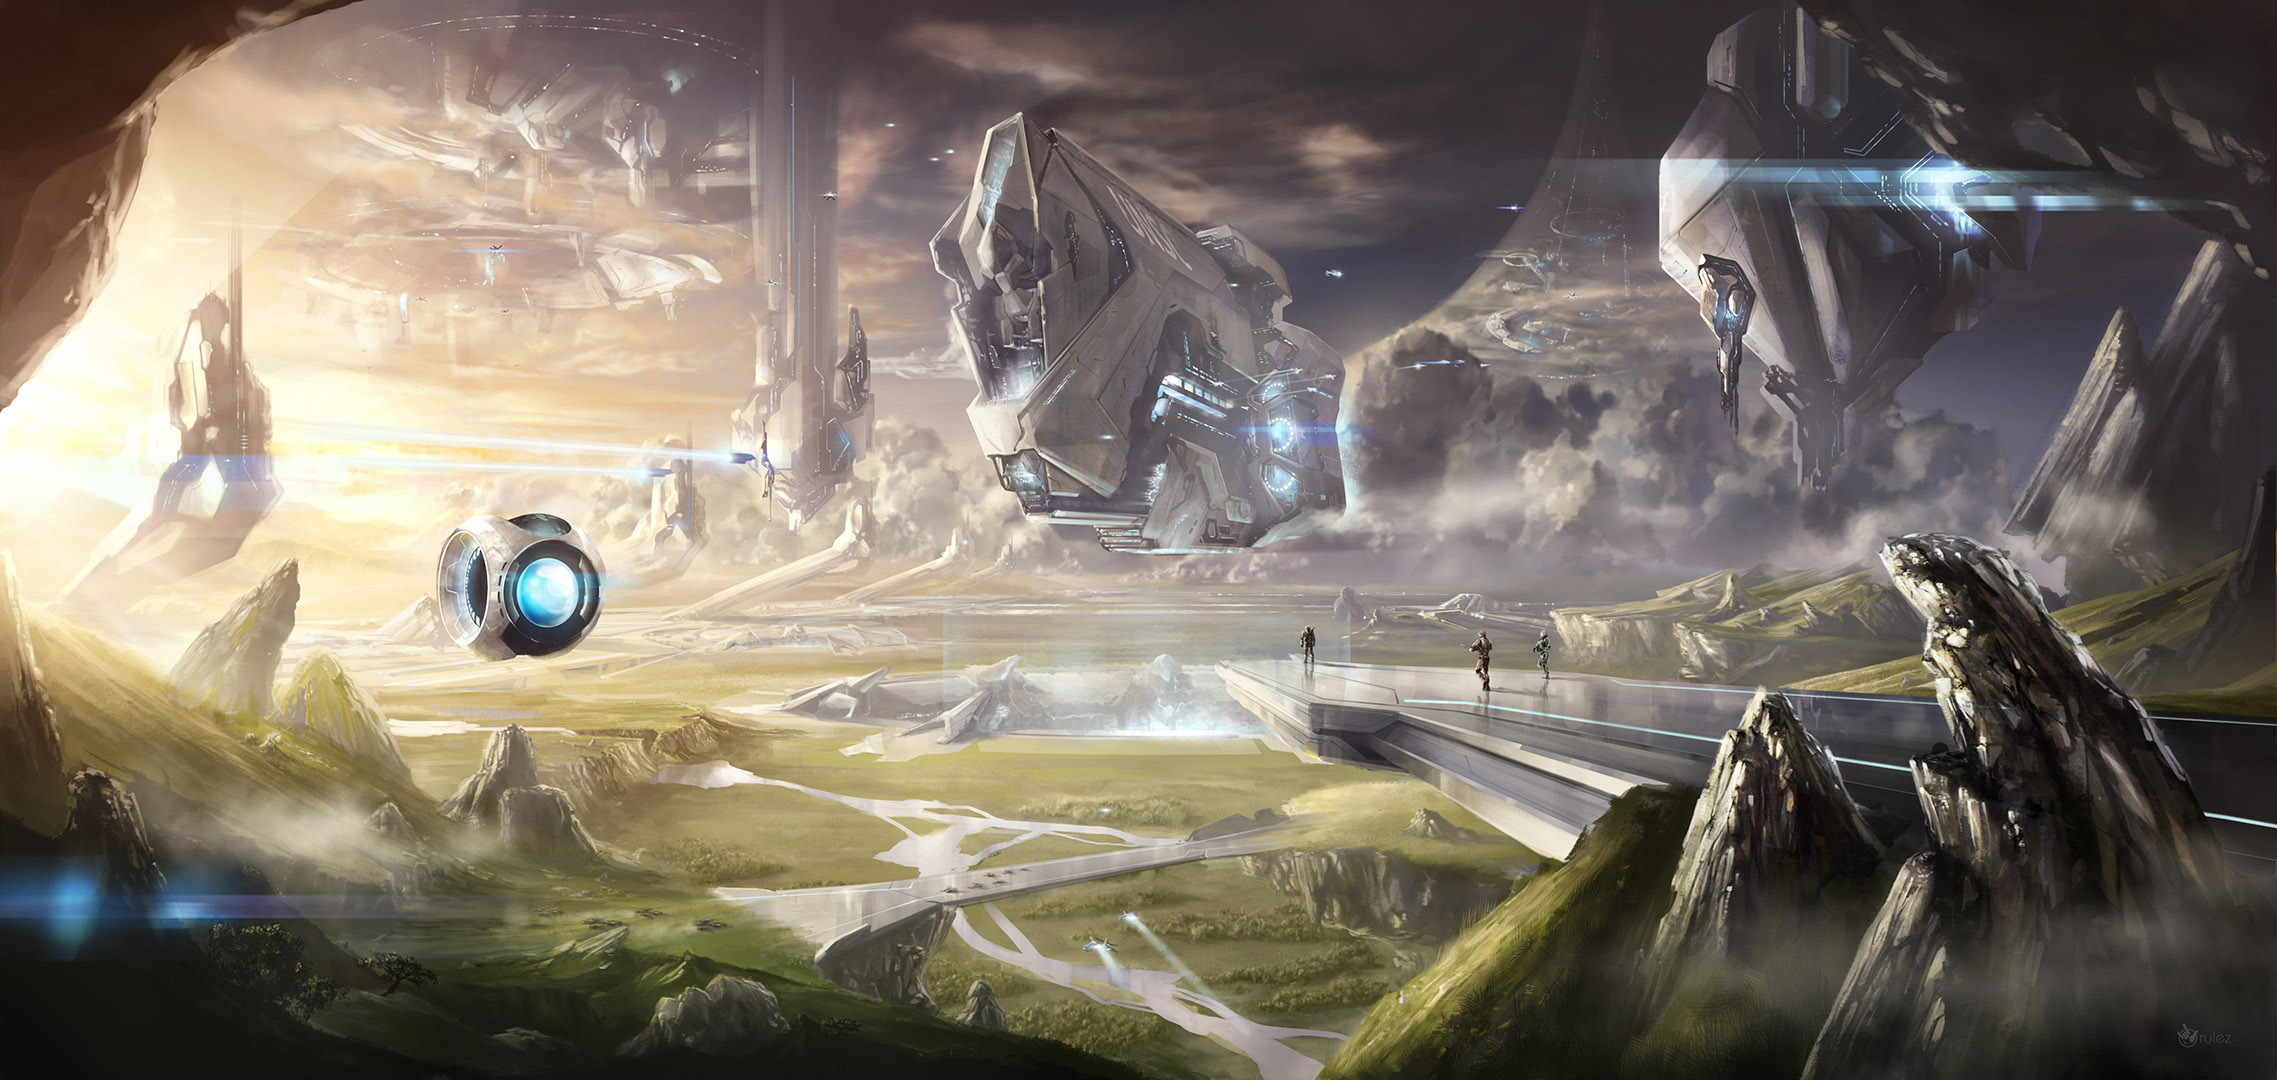 Video Game Halo Landscape Spaceship People 2277x1080